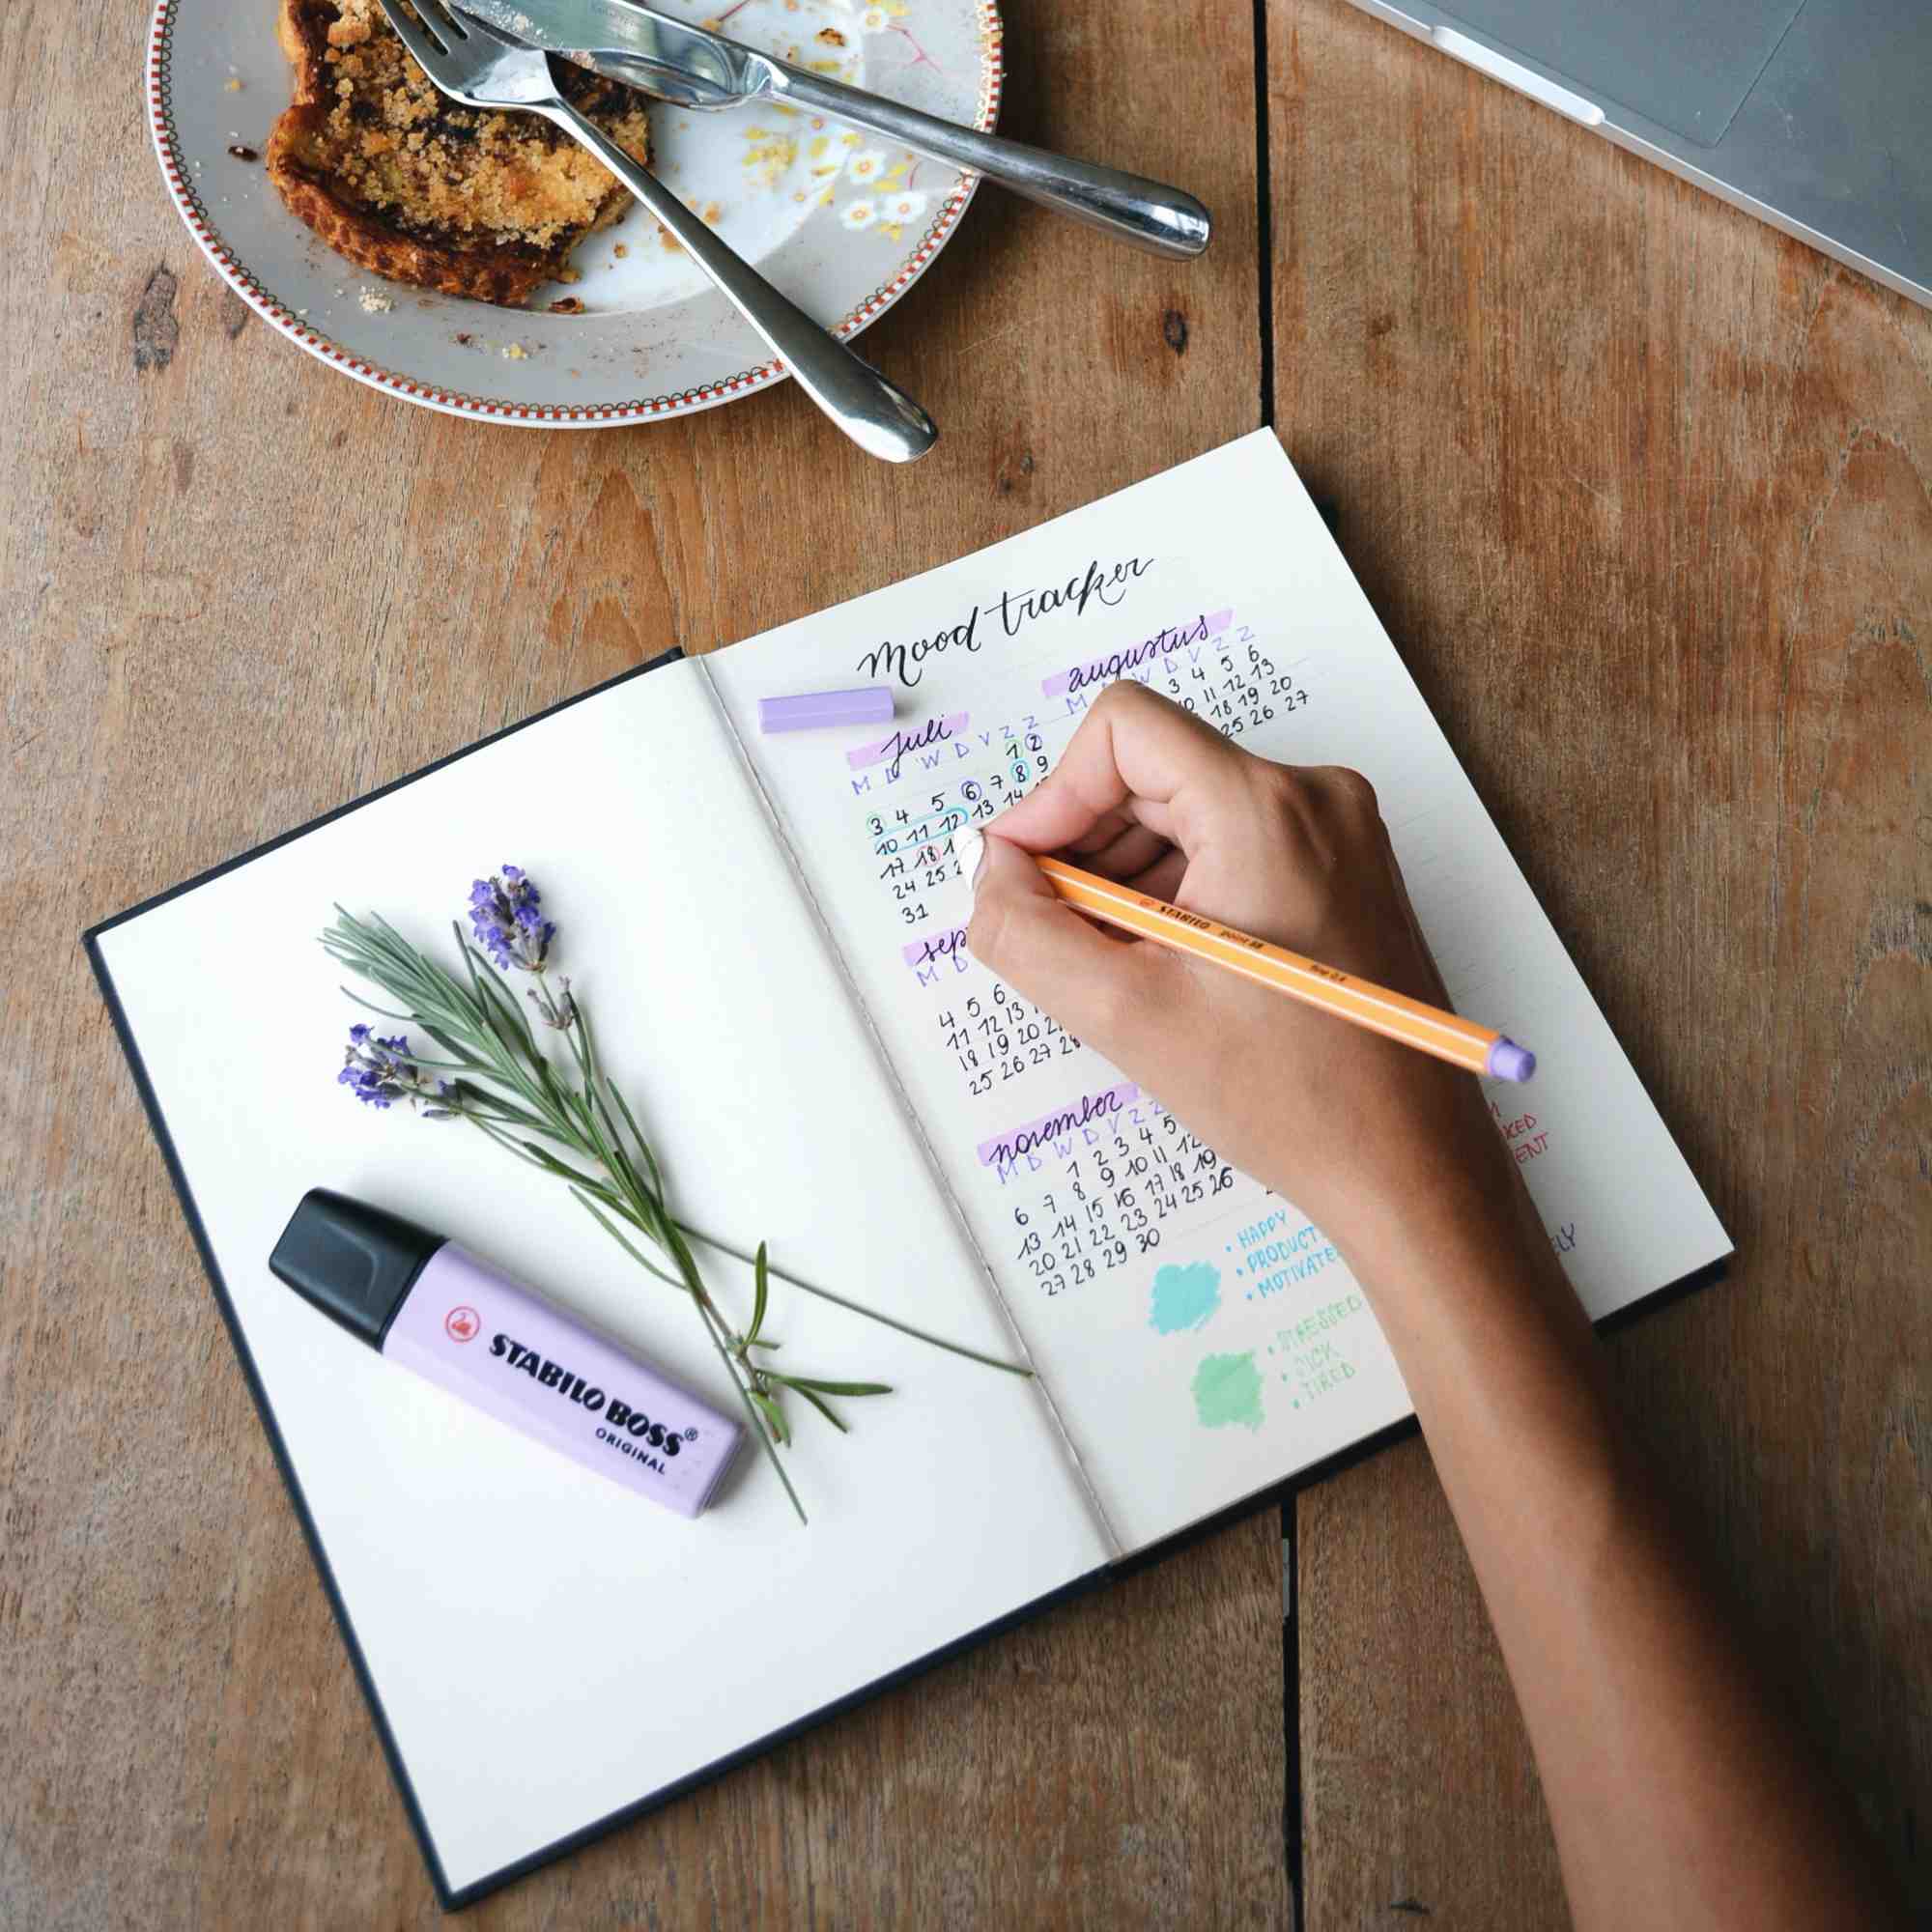 Diary vs. Purposeful Journaling. Do you keep a “diary” or simply